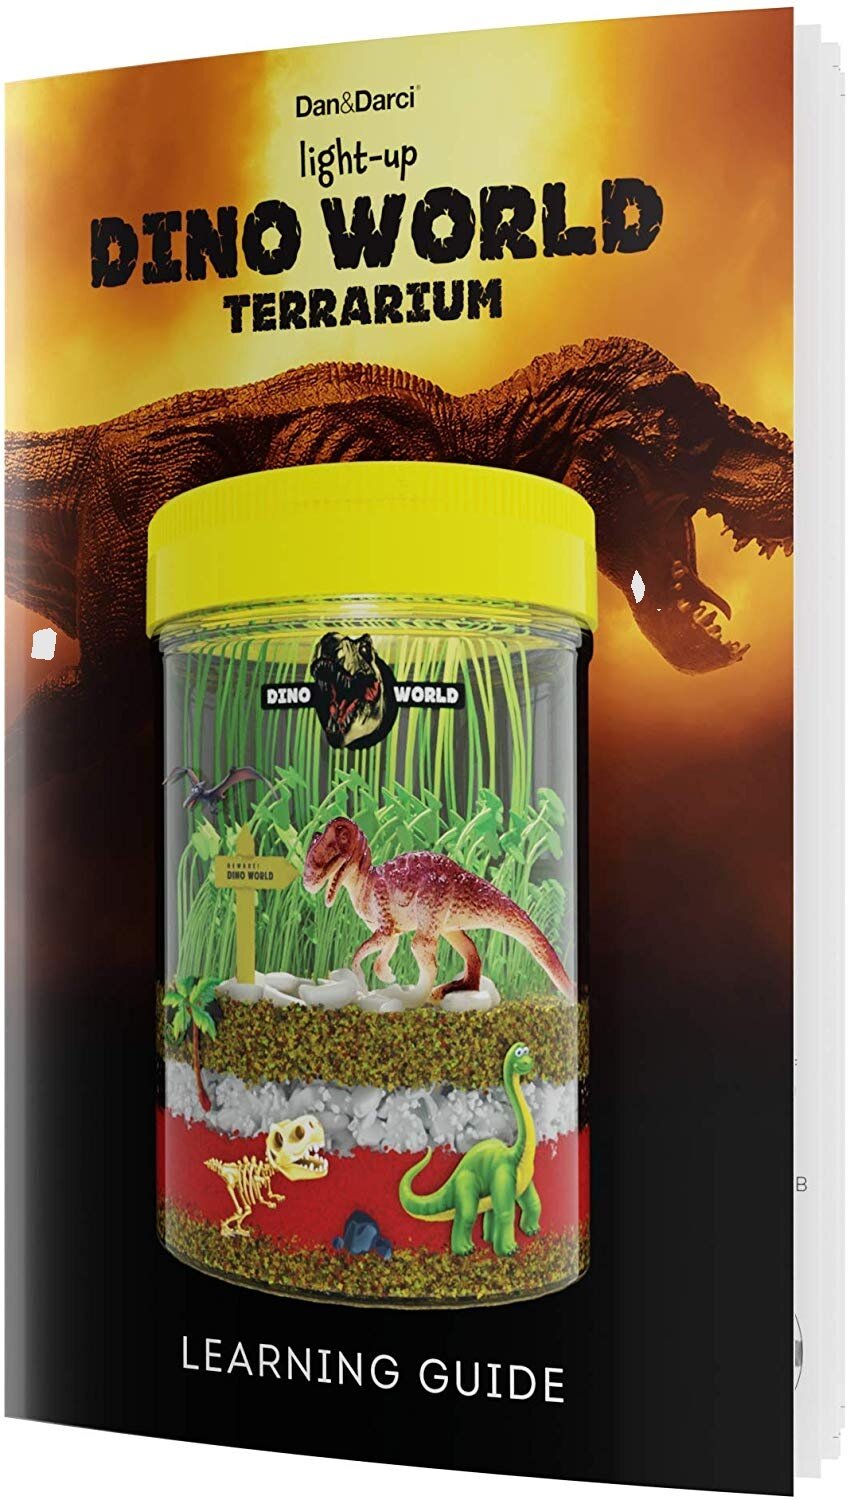 Light-up Dino World Terrarium Kit for Kids with LED Light on Lid Dinosaur Toys Gardening Gifts Science Kits Create Your Own Customized Mini Dinosaur Garden in a Jar That Glows at Night